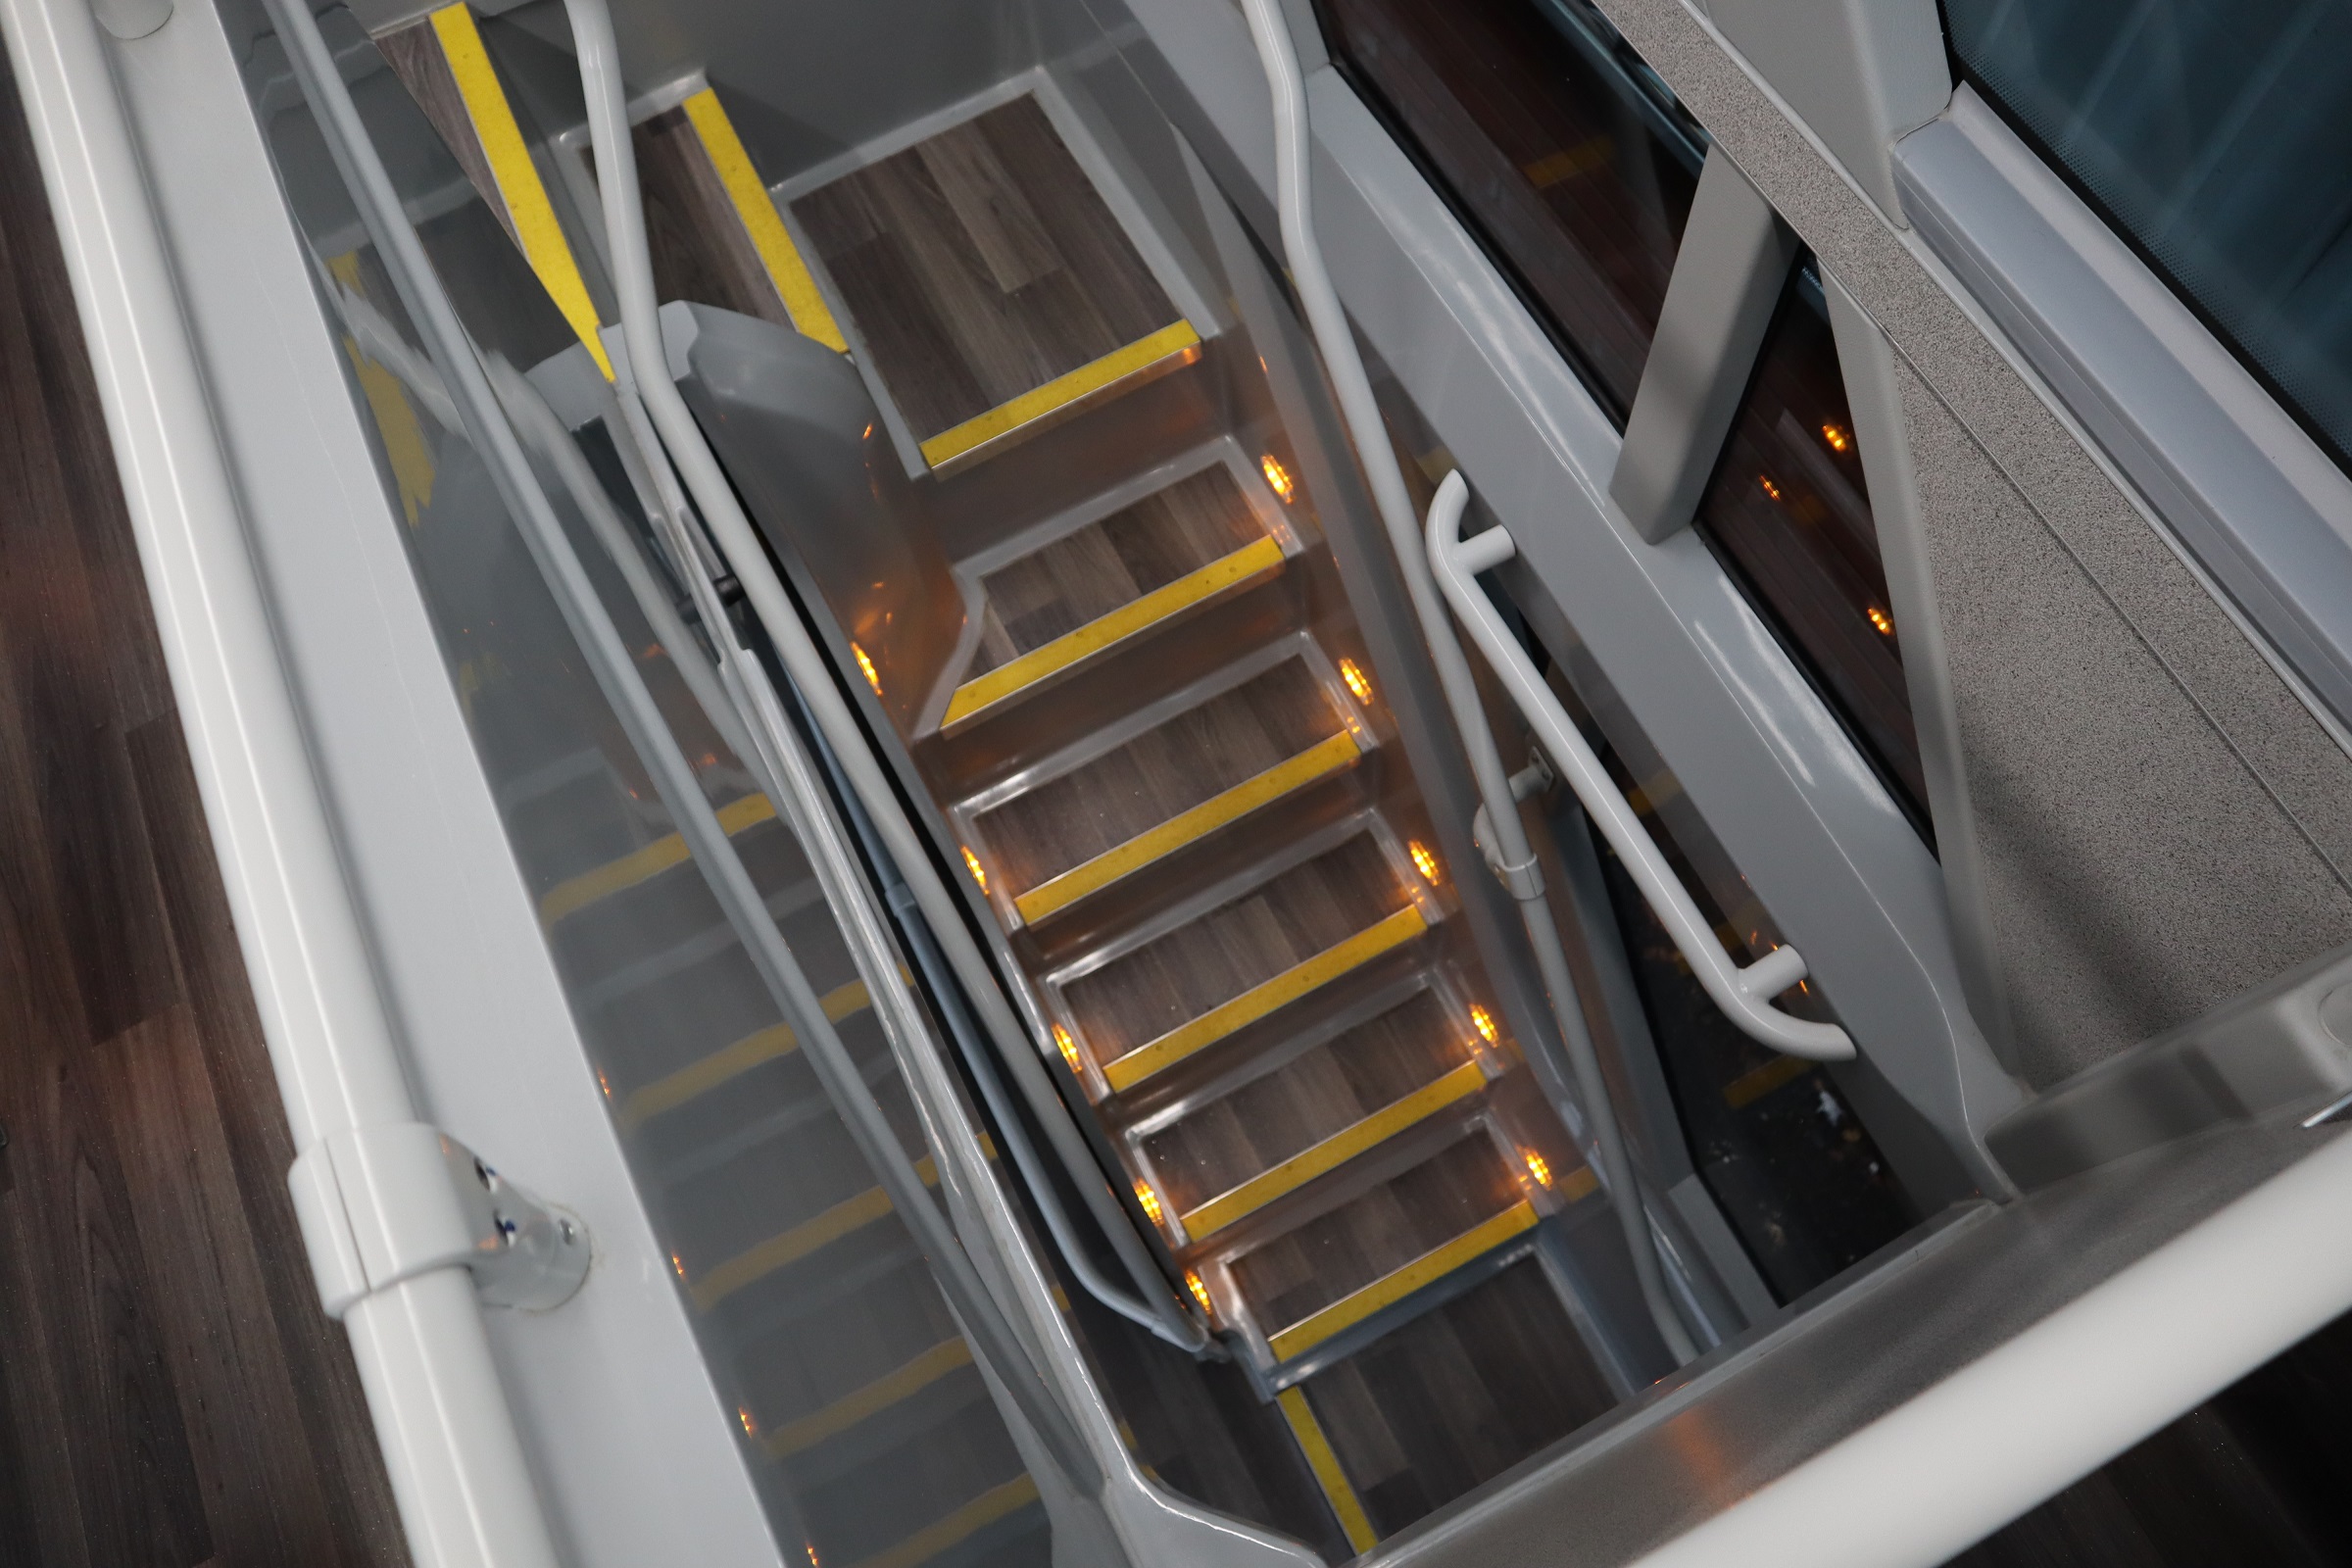 Staircase on double decker bus